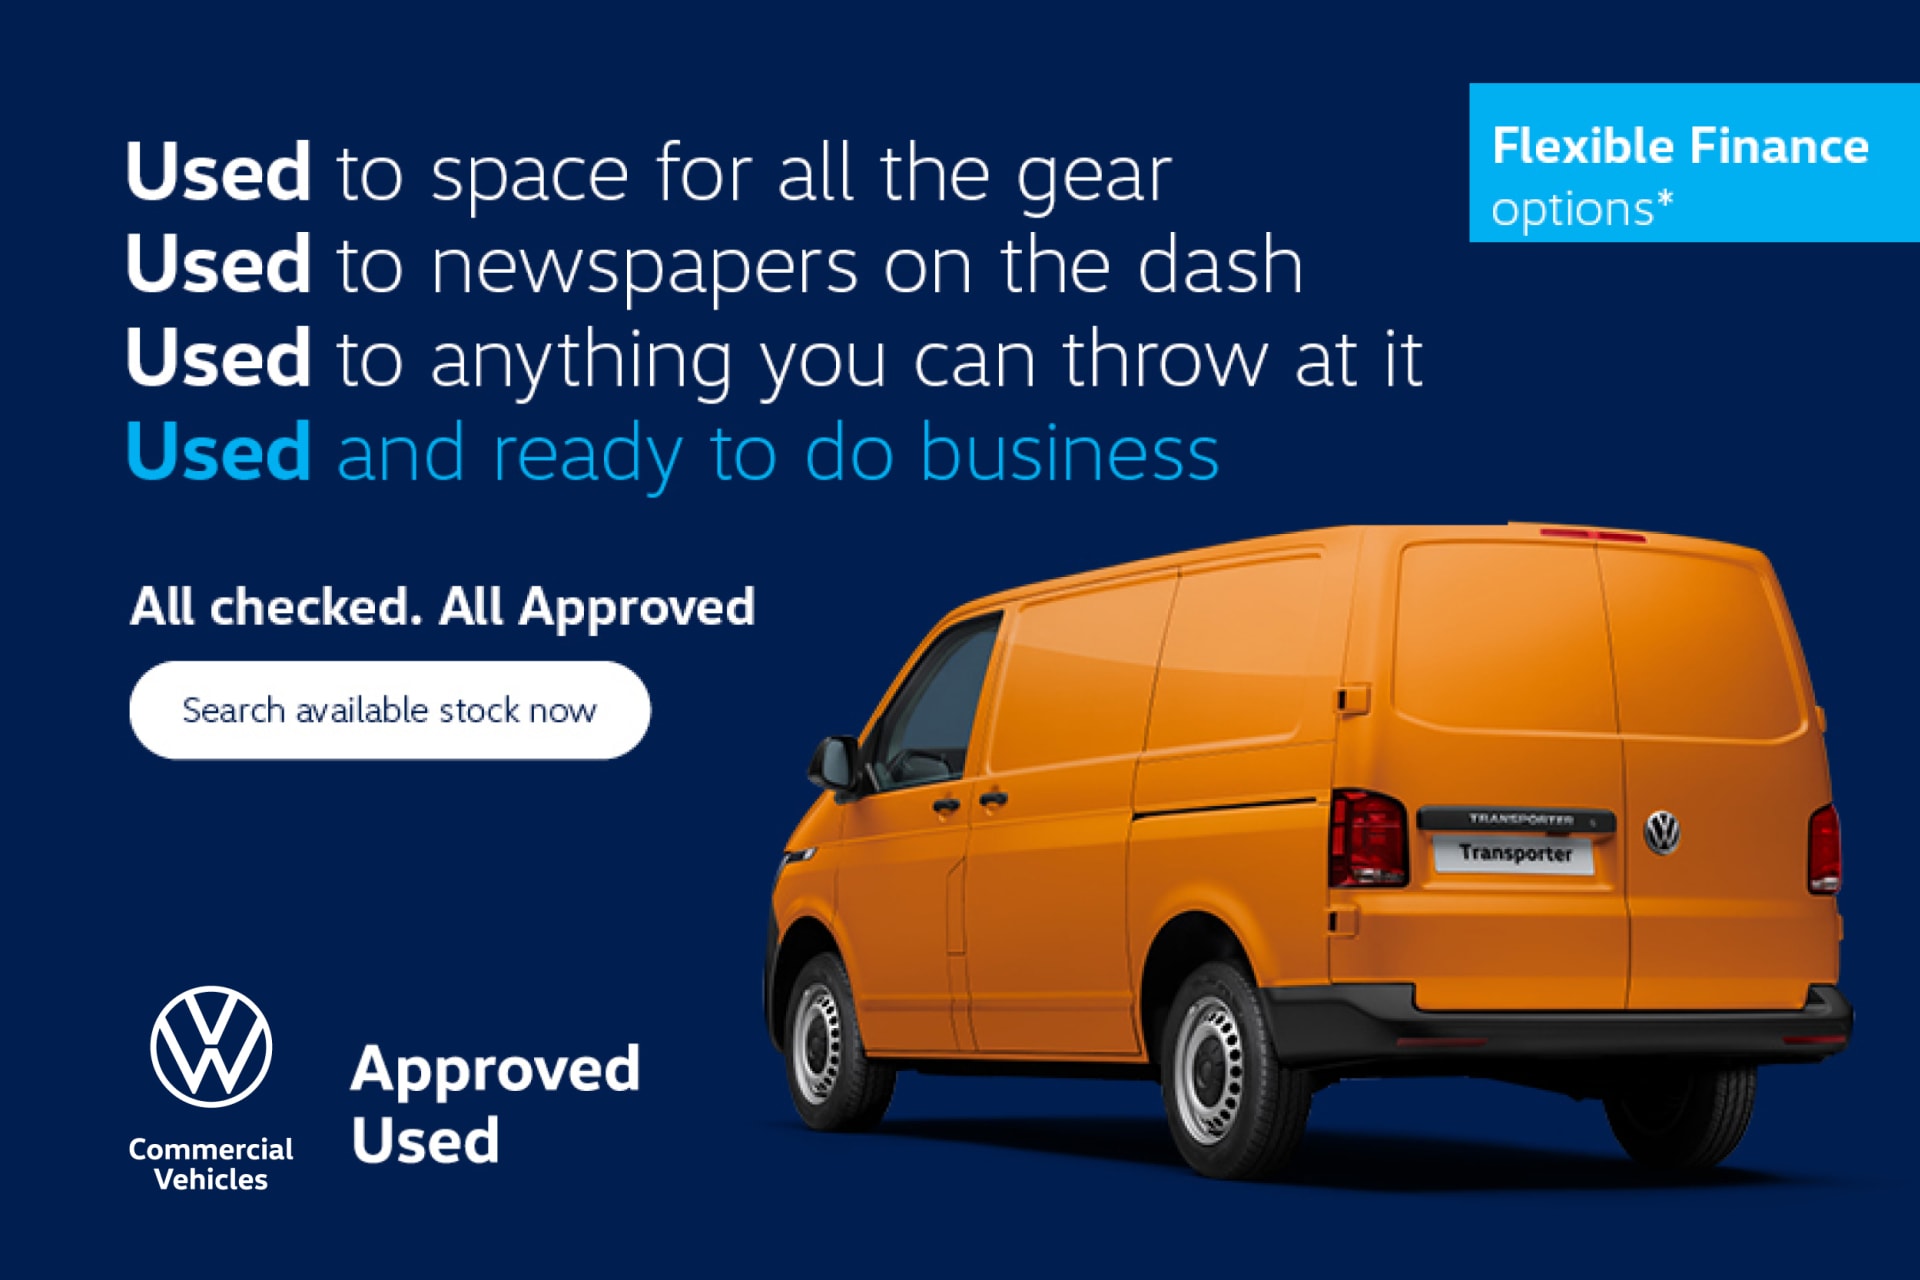 Approved Used Volkswagen Commercial Vehicles